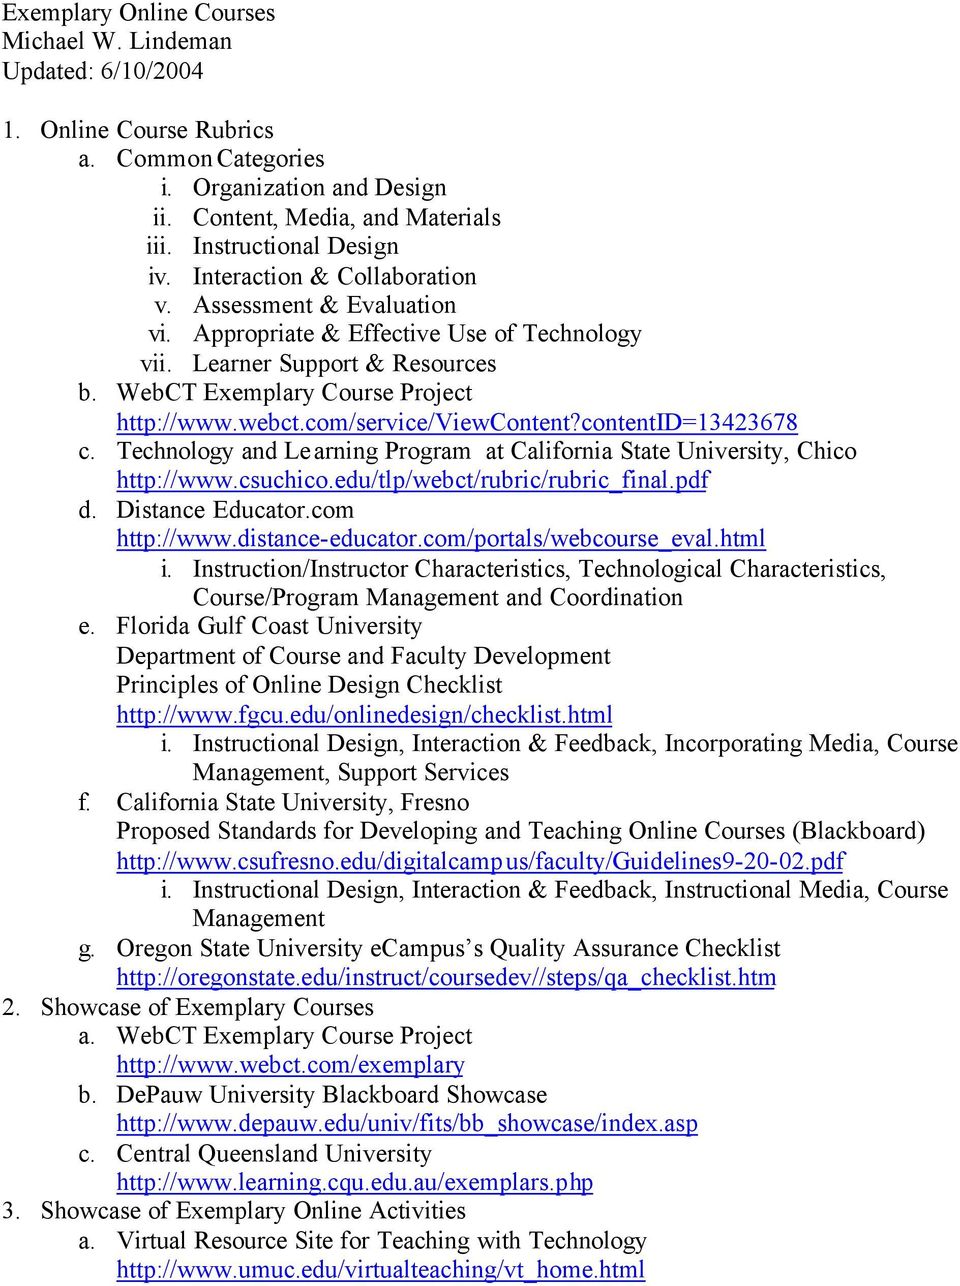 com/service/viewcontent?contentid=13423678 c. Technology and Program at California State University, Chico http://www.csuchico.edu/tlp/webct/rubric/rubric_final.pdf d. Distance Educator.